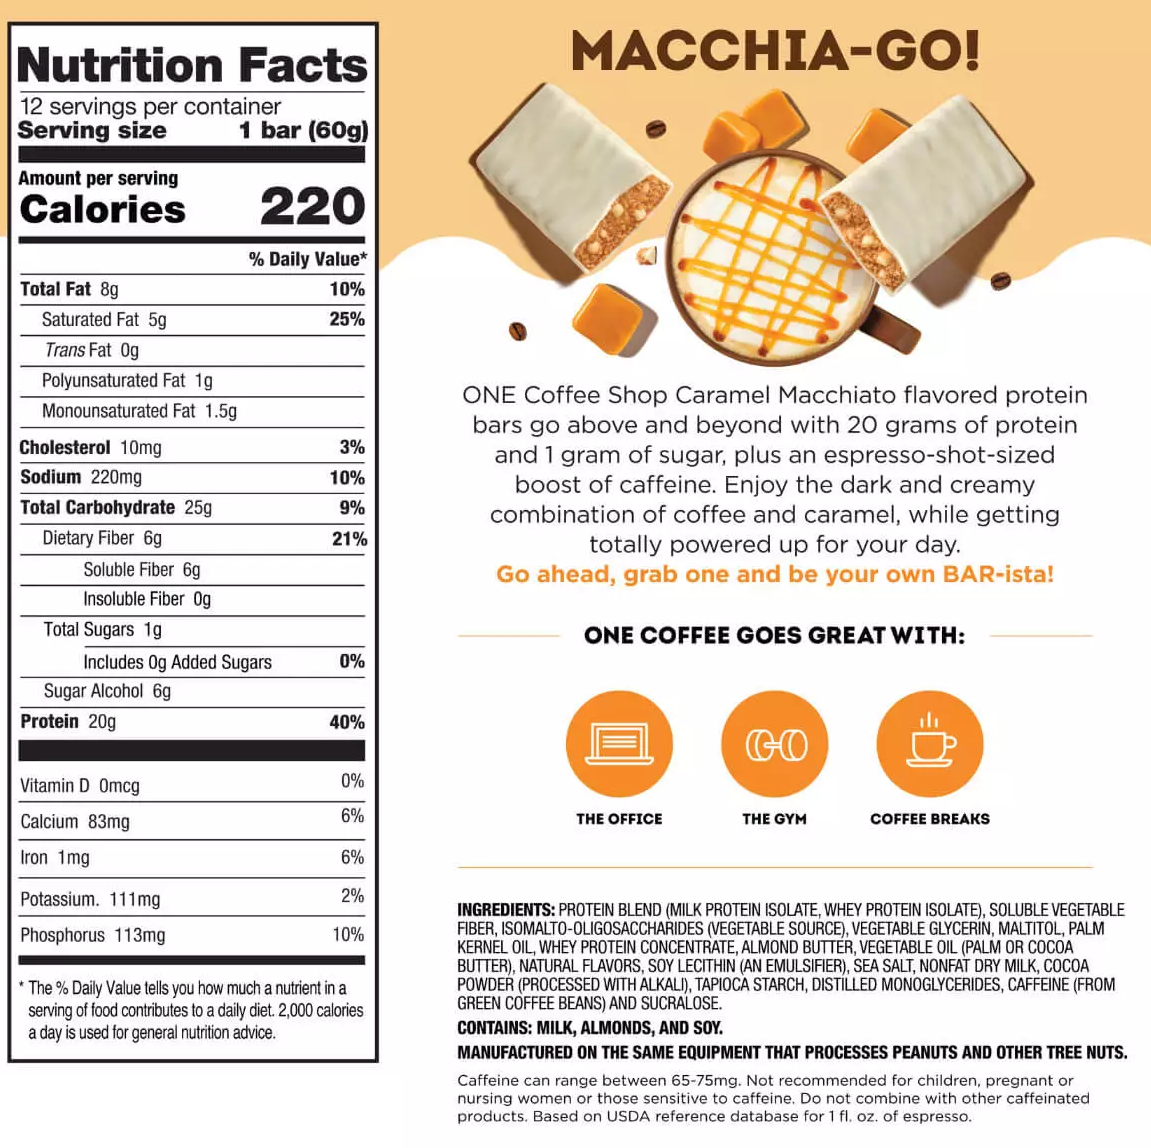 Nutrition facts and ingredients for a Coffee Shop Caramel Macchiato flavored protein bar by MACCHIA-GO! Features 20g protein, 1g sugar and 65-75mg caffeine.